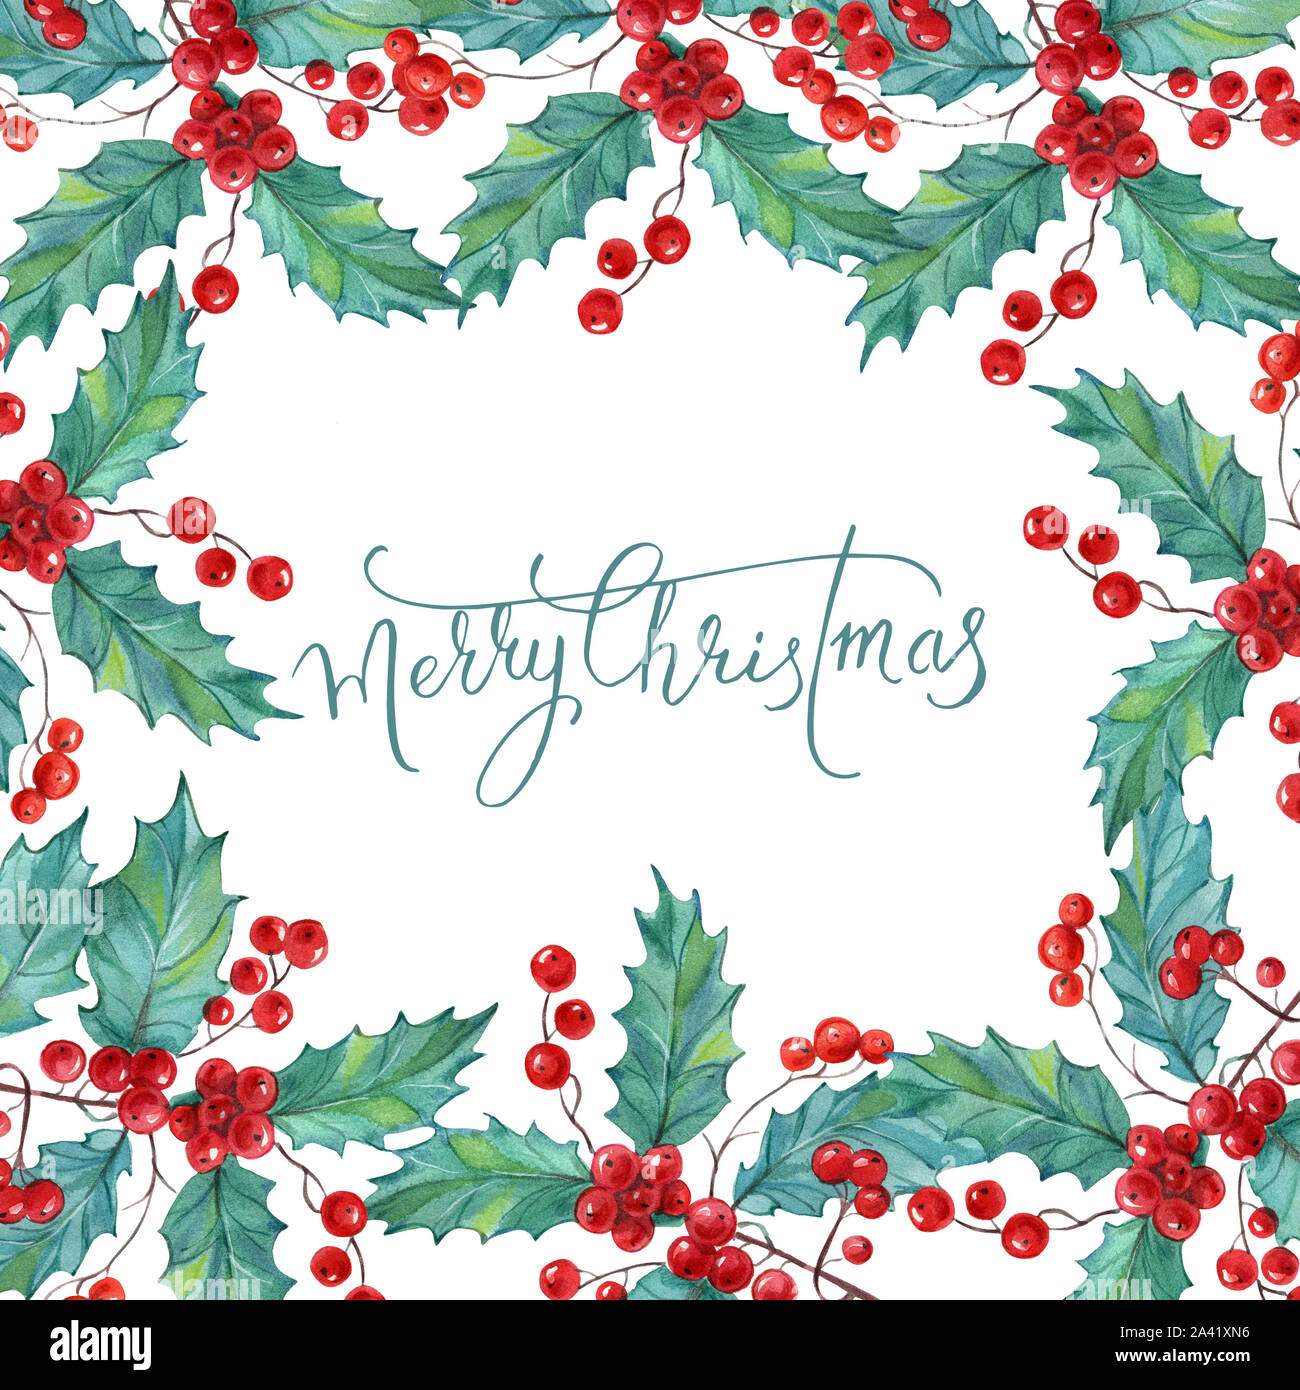 Pattern of Christmas sprigs of mistletoe on white background. Winter  holiday theme. suitable for postcards, posters, web pages and textiles  Stock Photo - Alamy